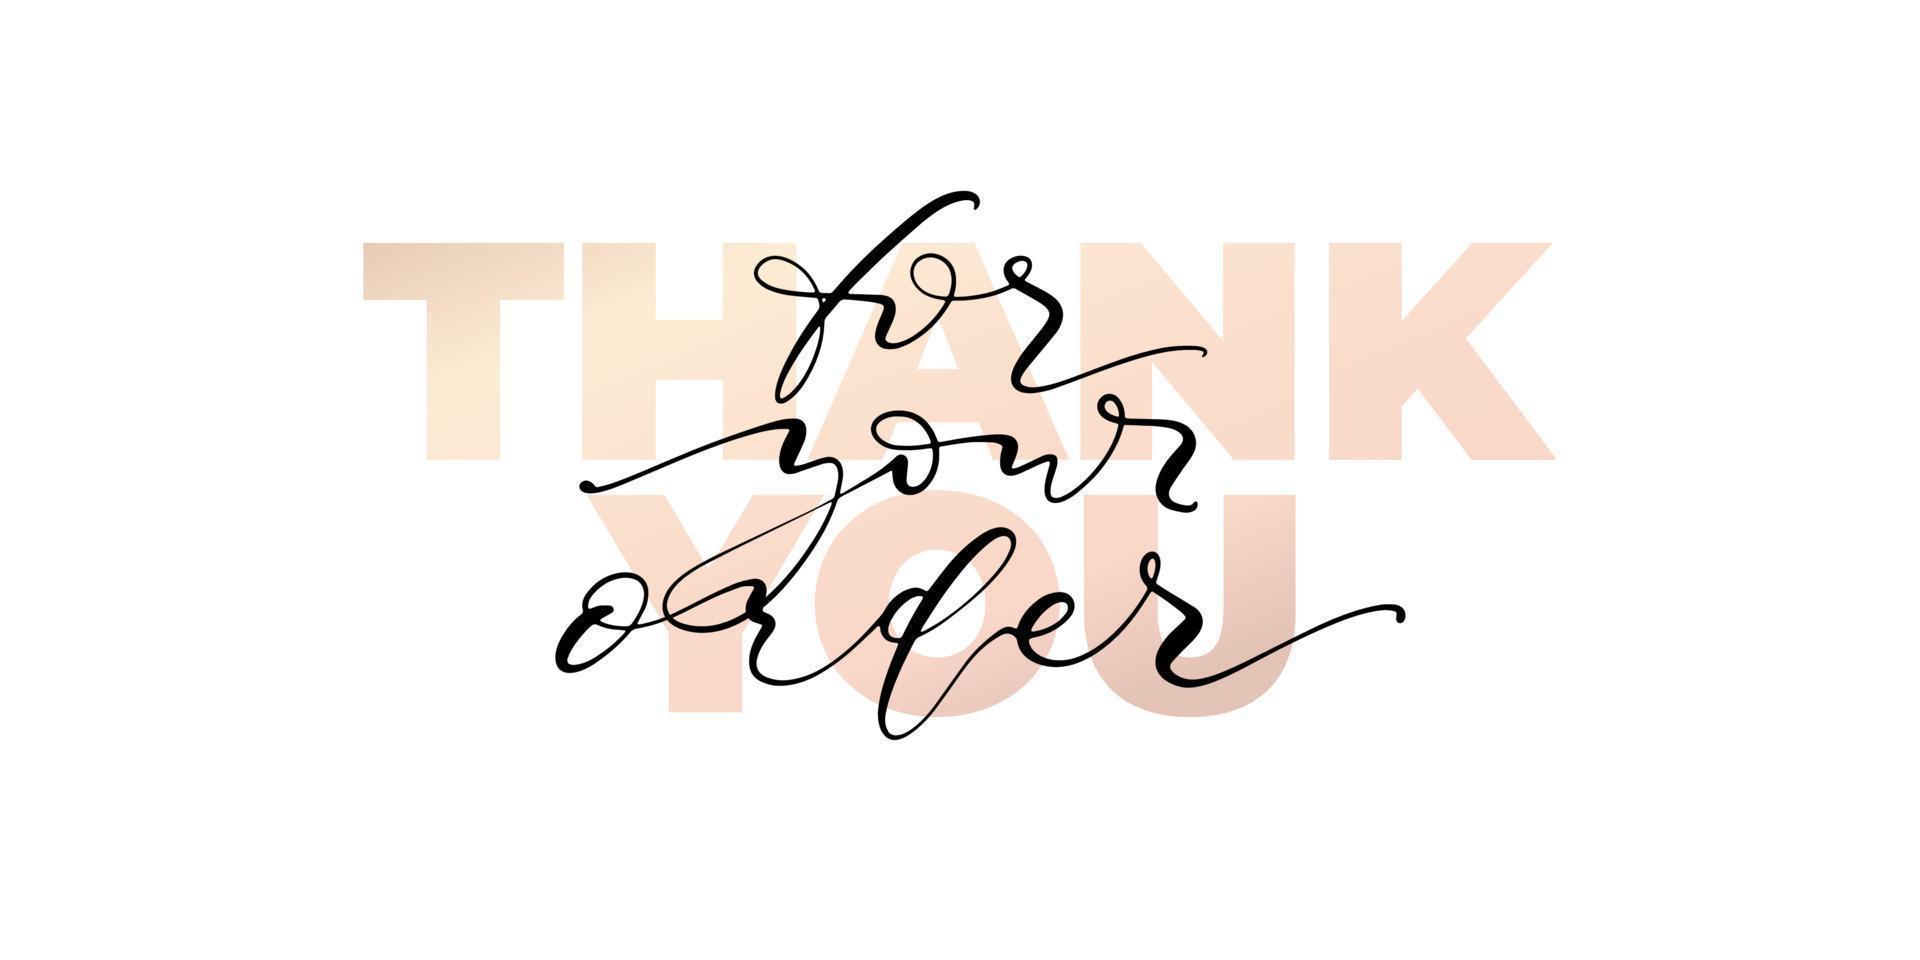 Thank you for your order hand written lettering with bold text on white background. Vector illustration. Design for social media, print lables, poster banner etc.